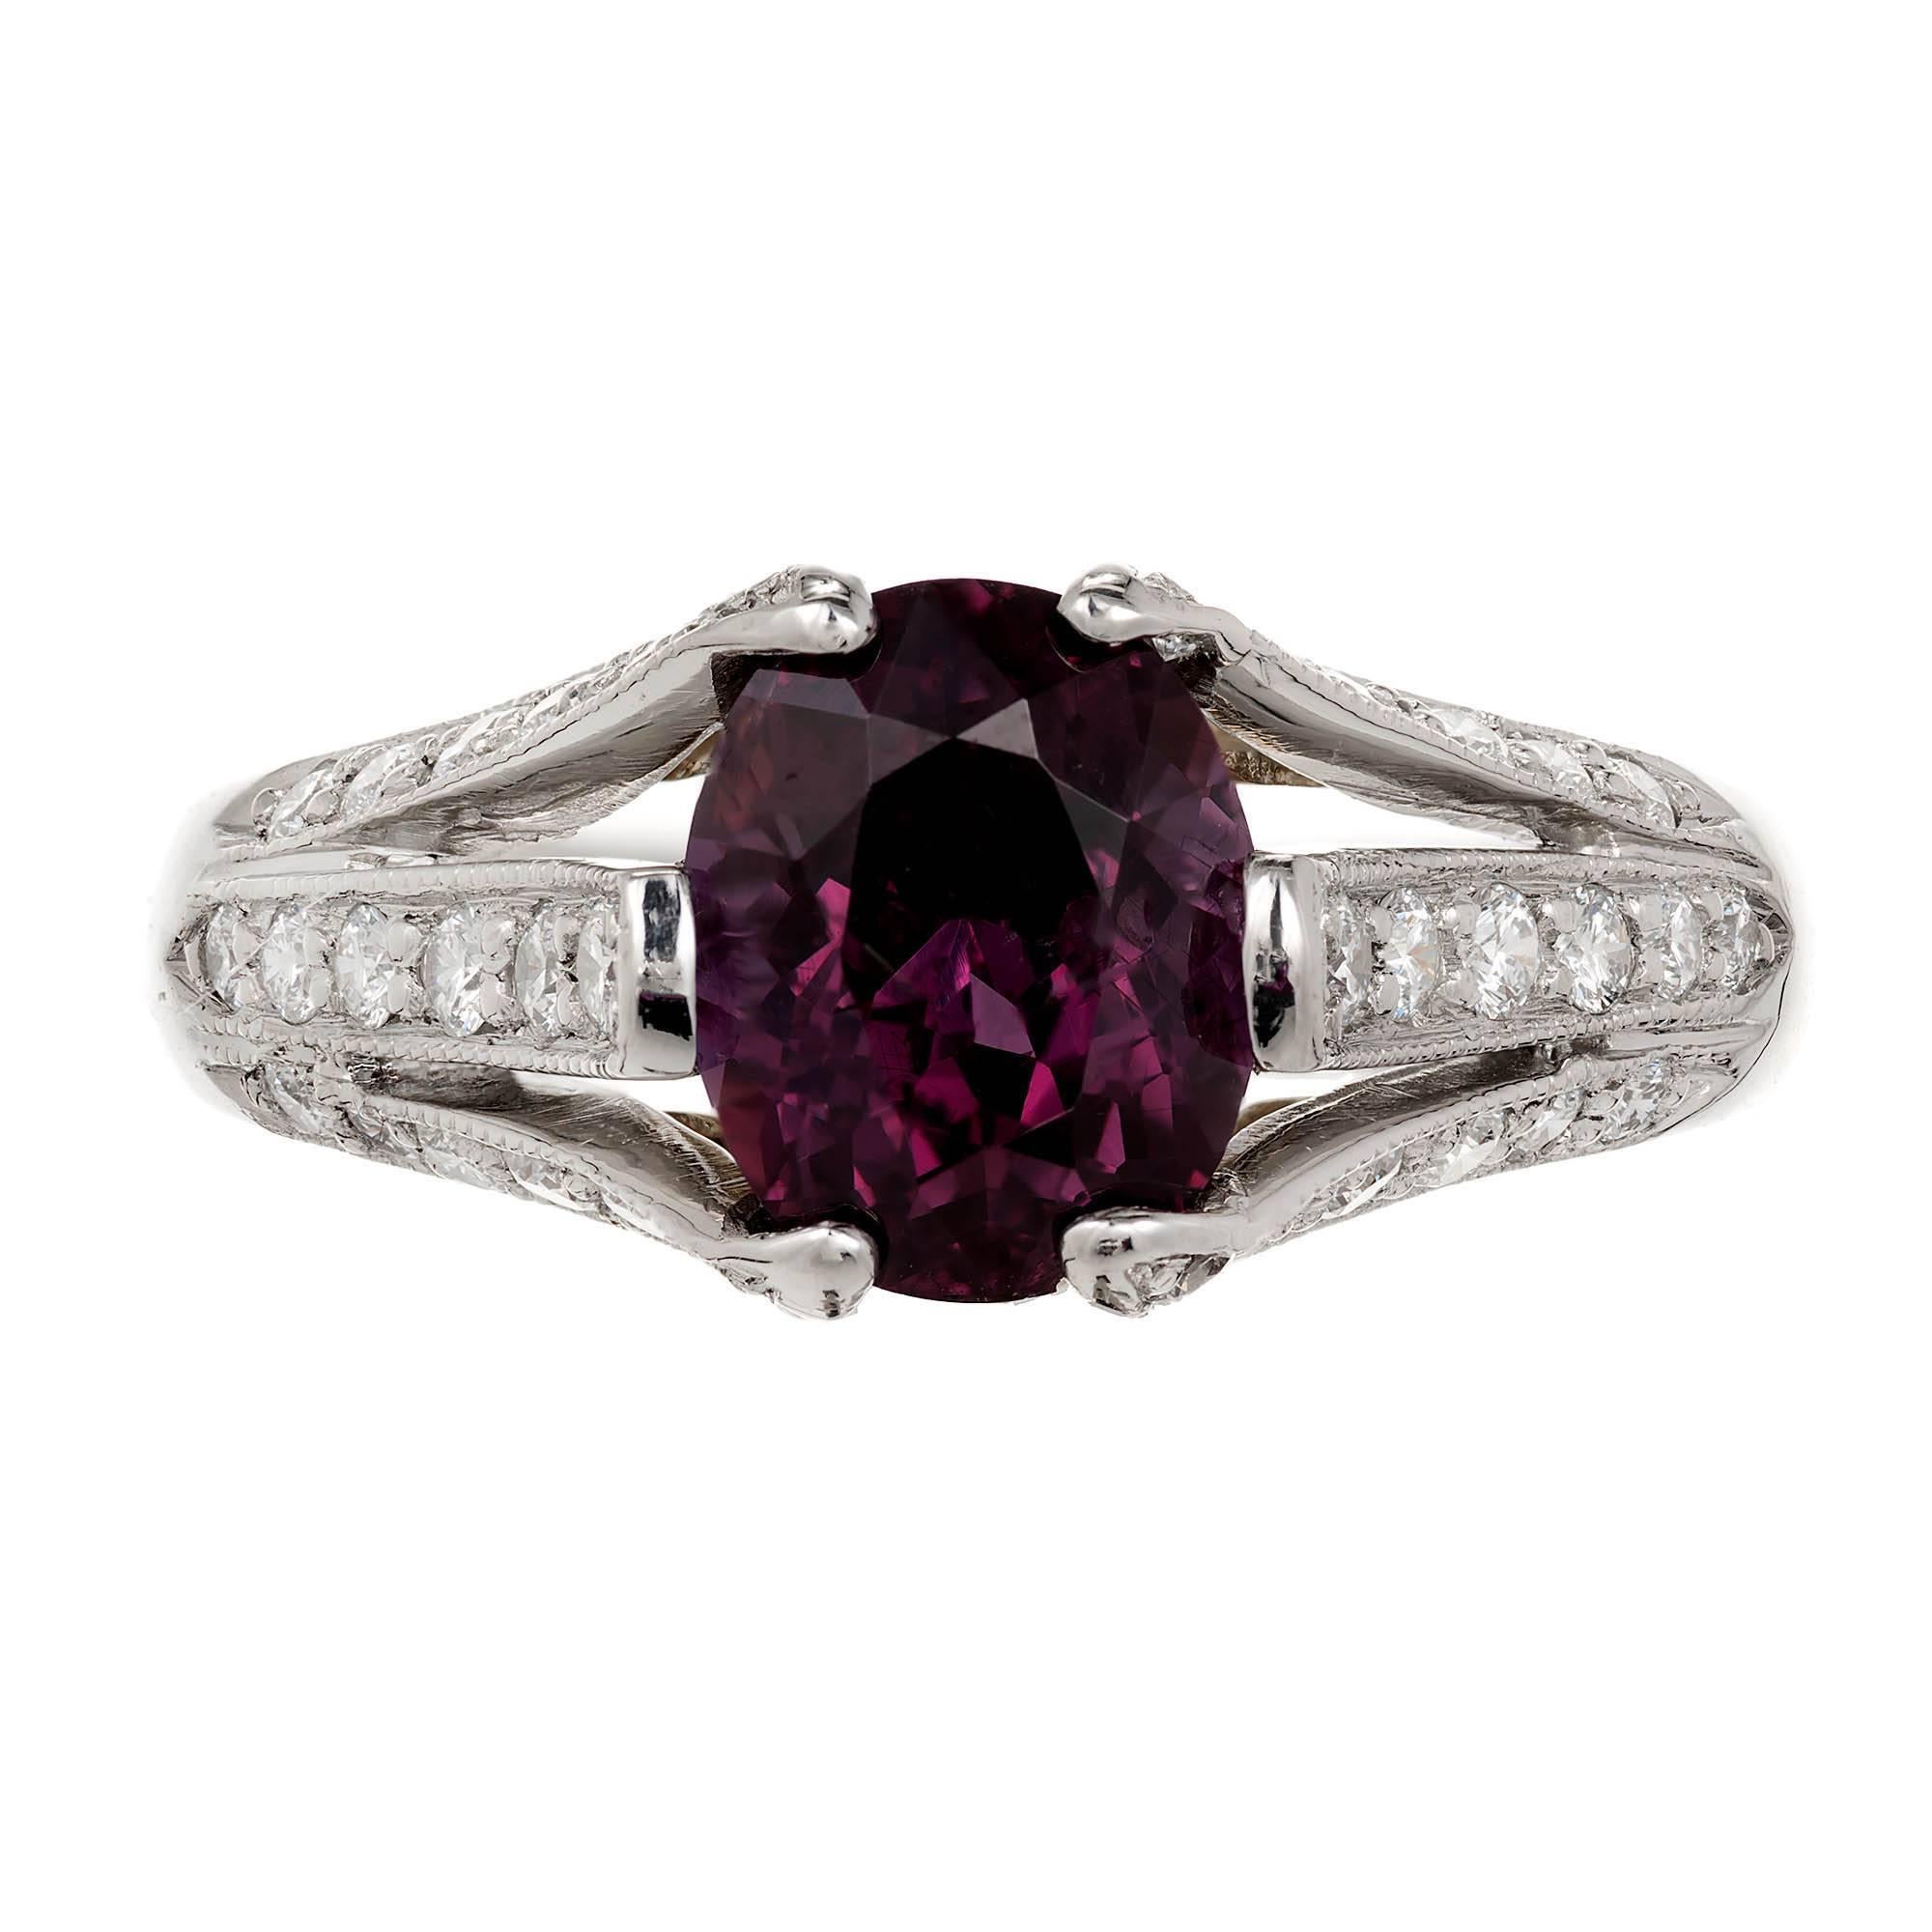 Richard Krementz color change Garnet ring, GIA certified natural blue to purple Garnet in a beautiful Diamond Pavé Platinum and 18k gold ring. Richard Krementz is famous for using the world’s finest colored gemstones in top quality settings. This is